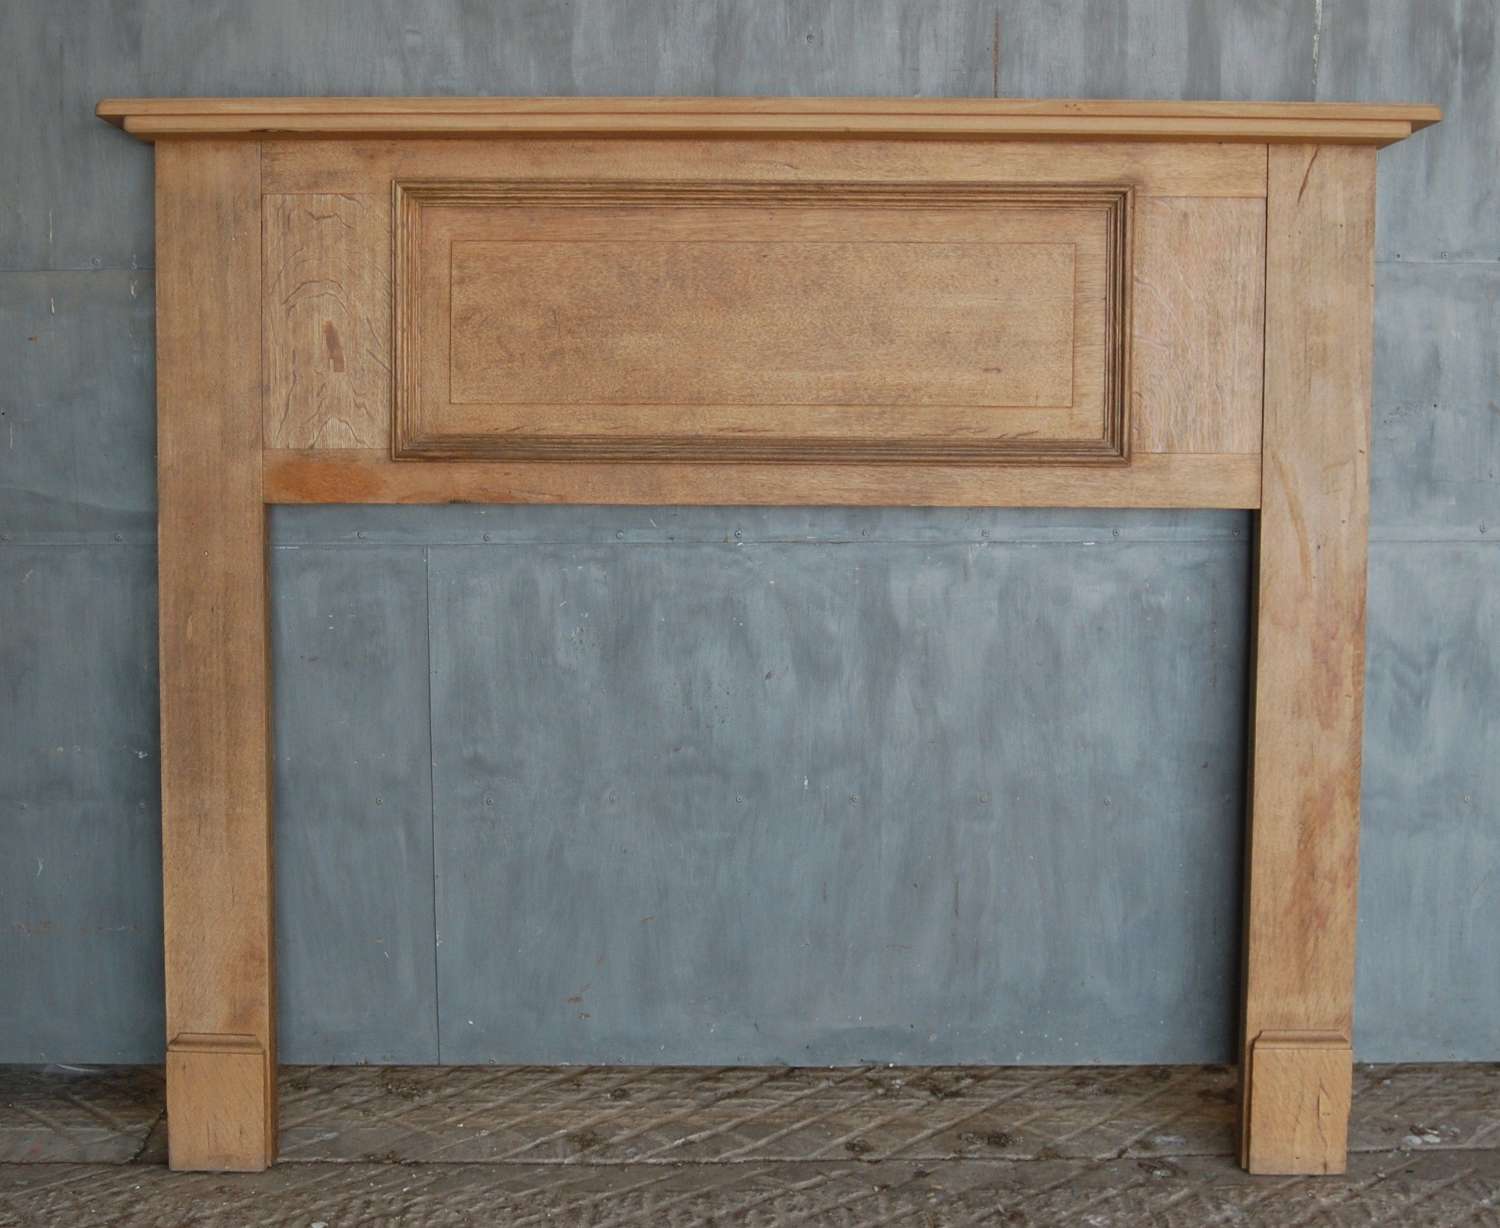 FS0170 A RECLAIMED VERY LARGE TRADITIONAL STYLE OAK FIRE SURROUND